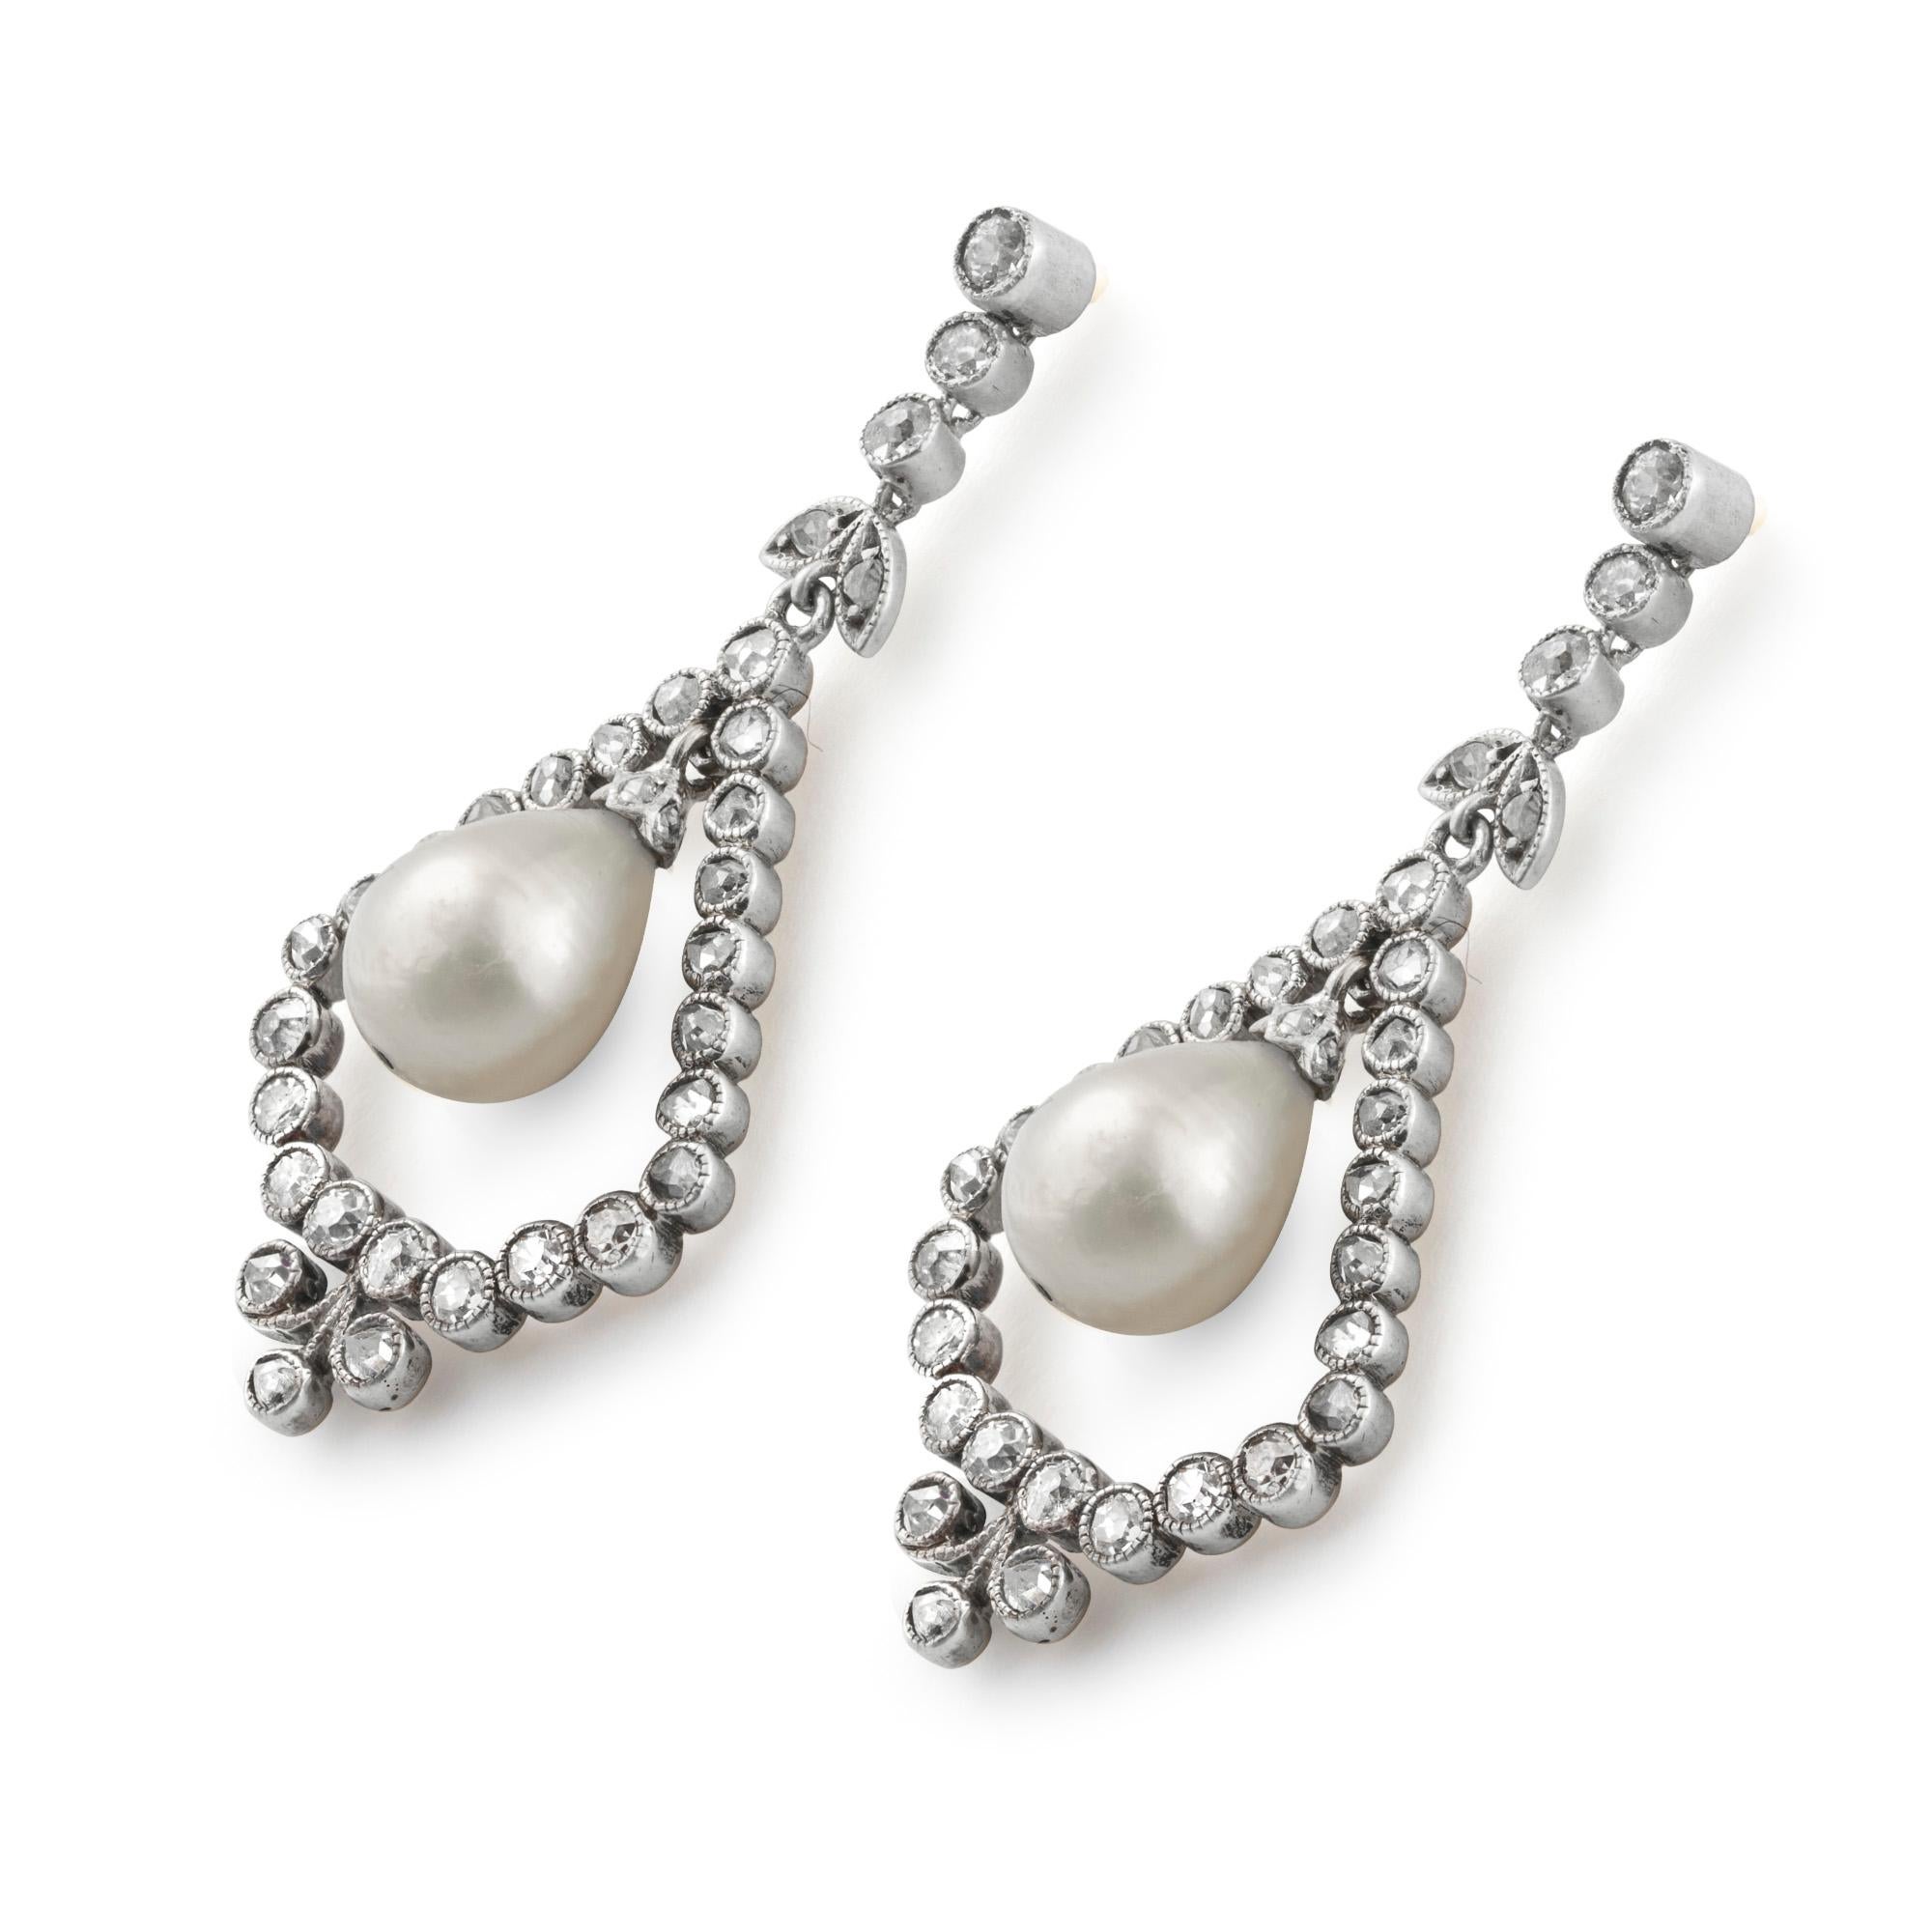 A pair of Edwardian natural pearl and diamond drop earrings, each earring comprising a natural pearl drop, accompanied by GCS report number 5776-5788, stating that the two pearls measure 7.6 - 7.7 x 9.2mm and 7.4 - 7.6 x 9.3mm and are natural